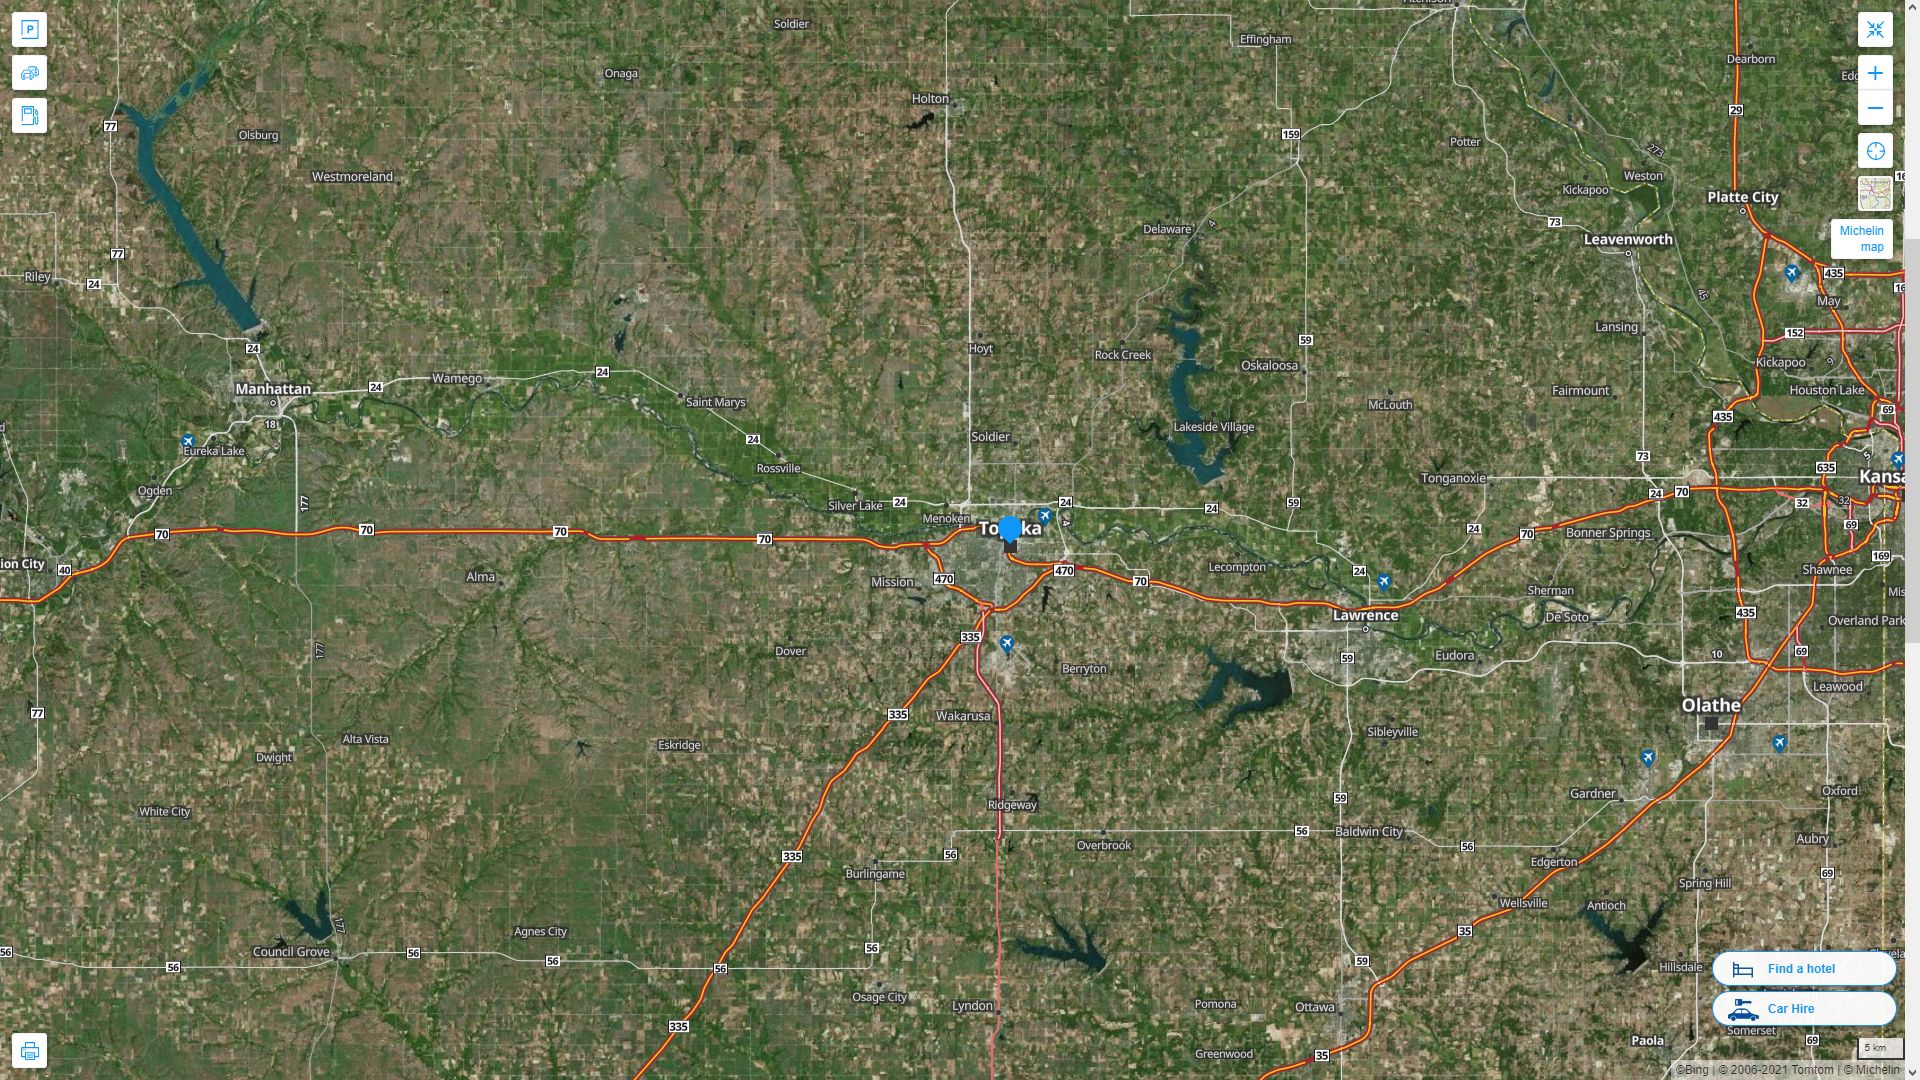 Topeka Kansas Highway and Road Map with Satellite View